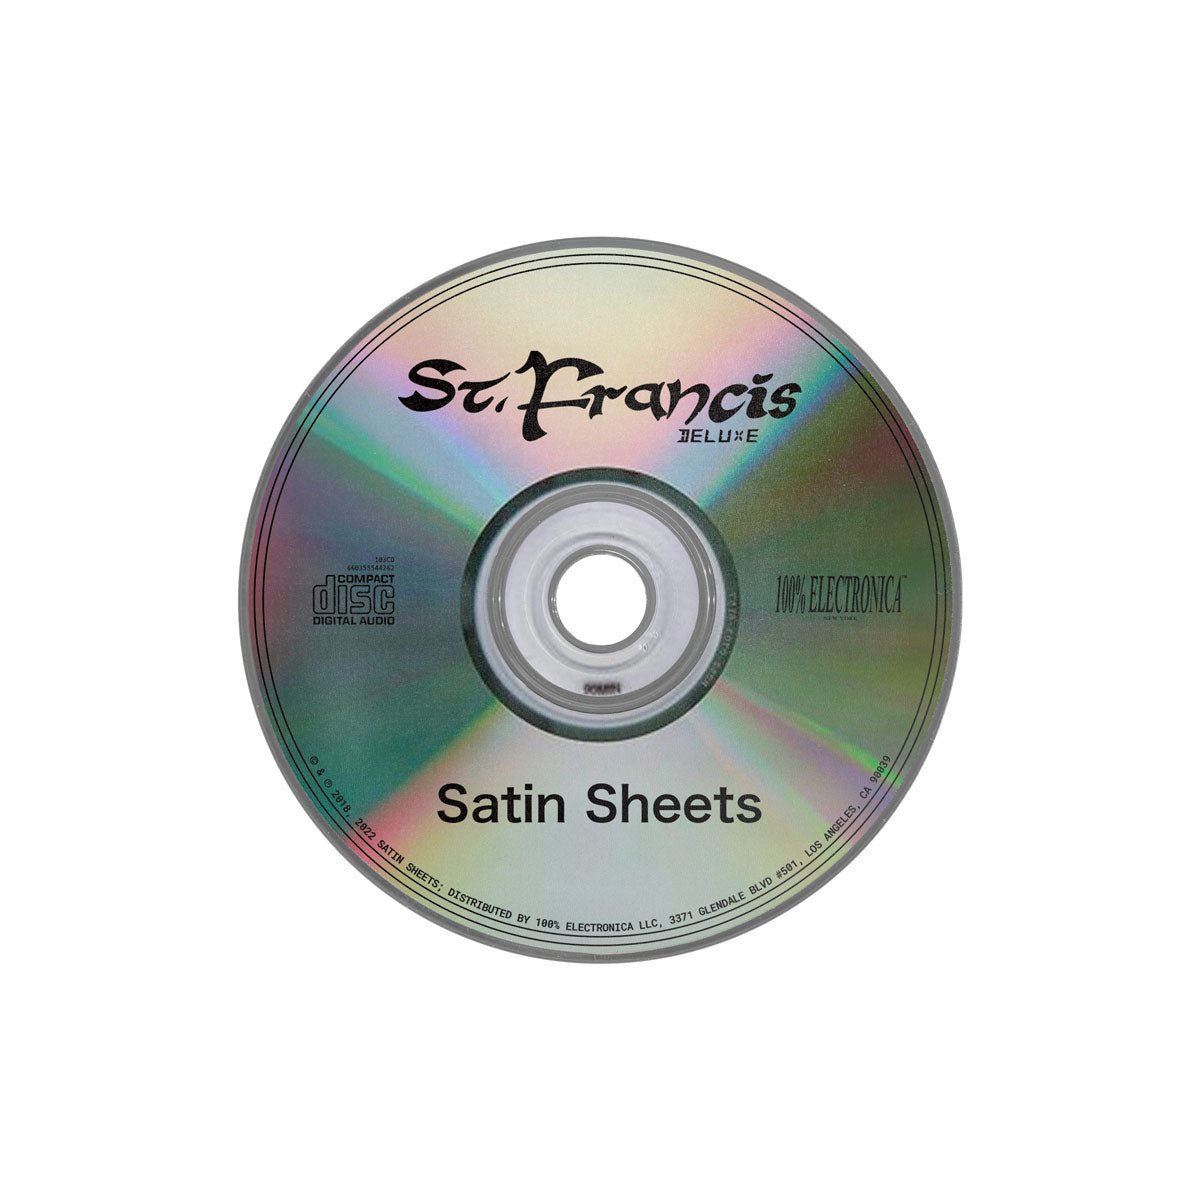 Satin Sheets - St. Francis Deluxe CD (St. Francis I + II) - 100% Electronica Official Store (Photo 2)